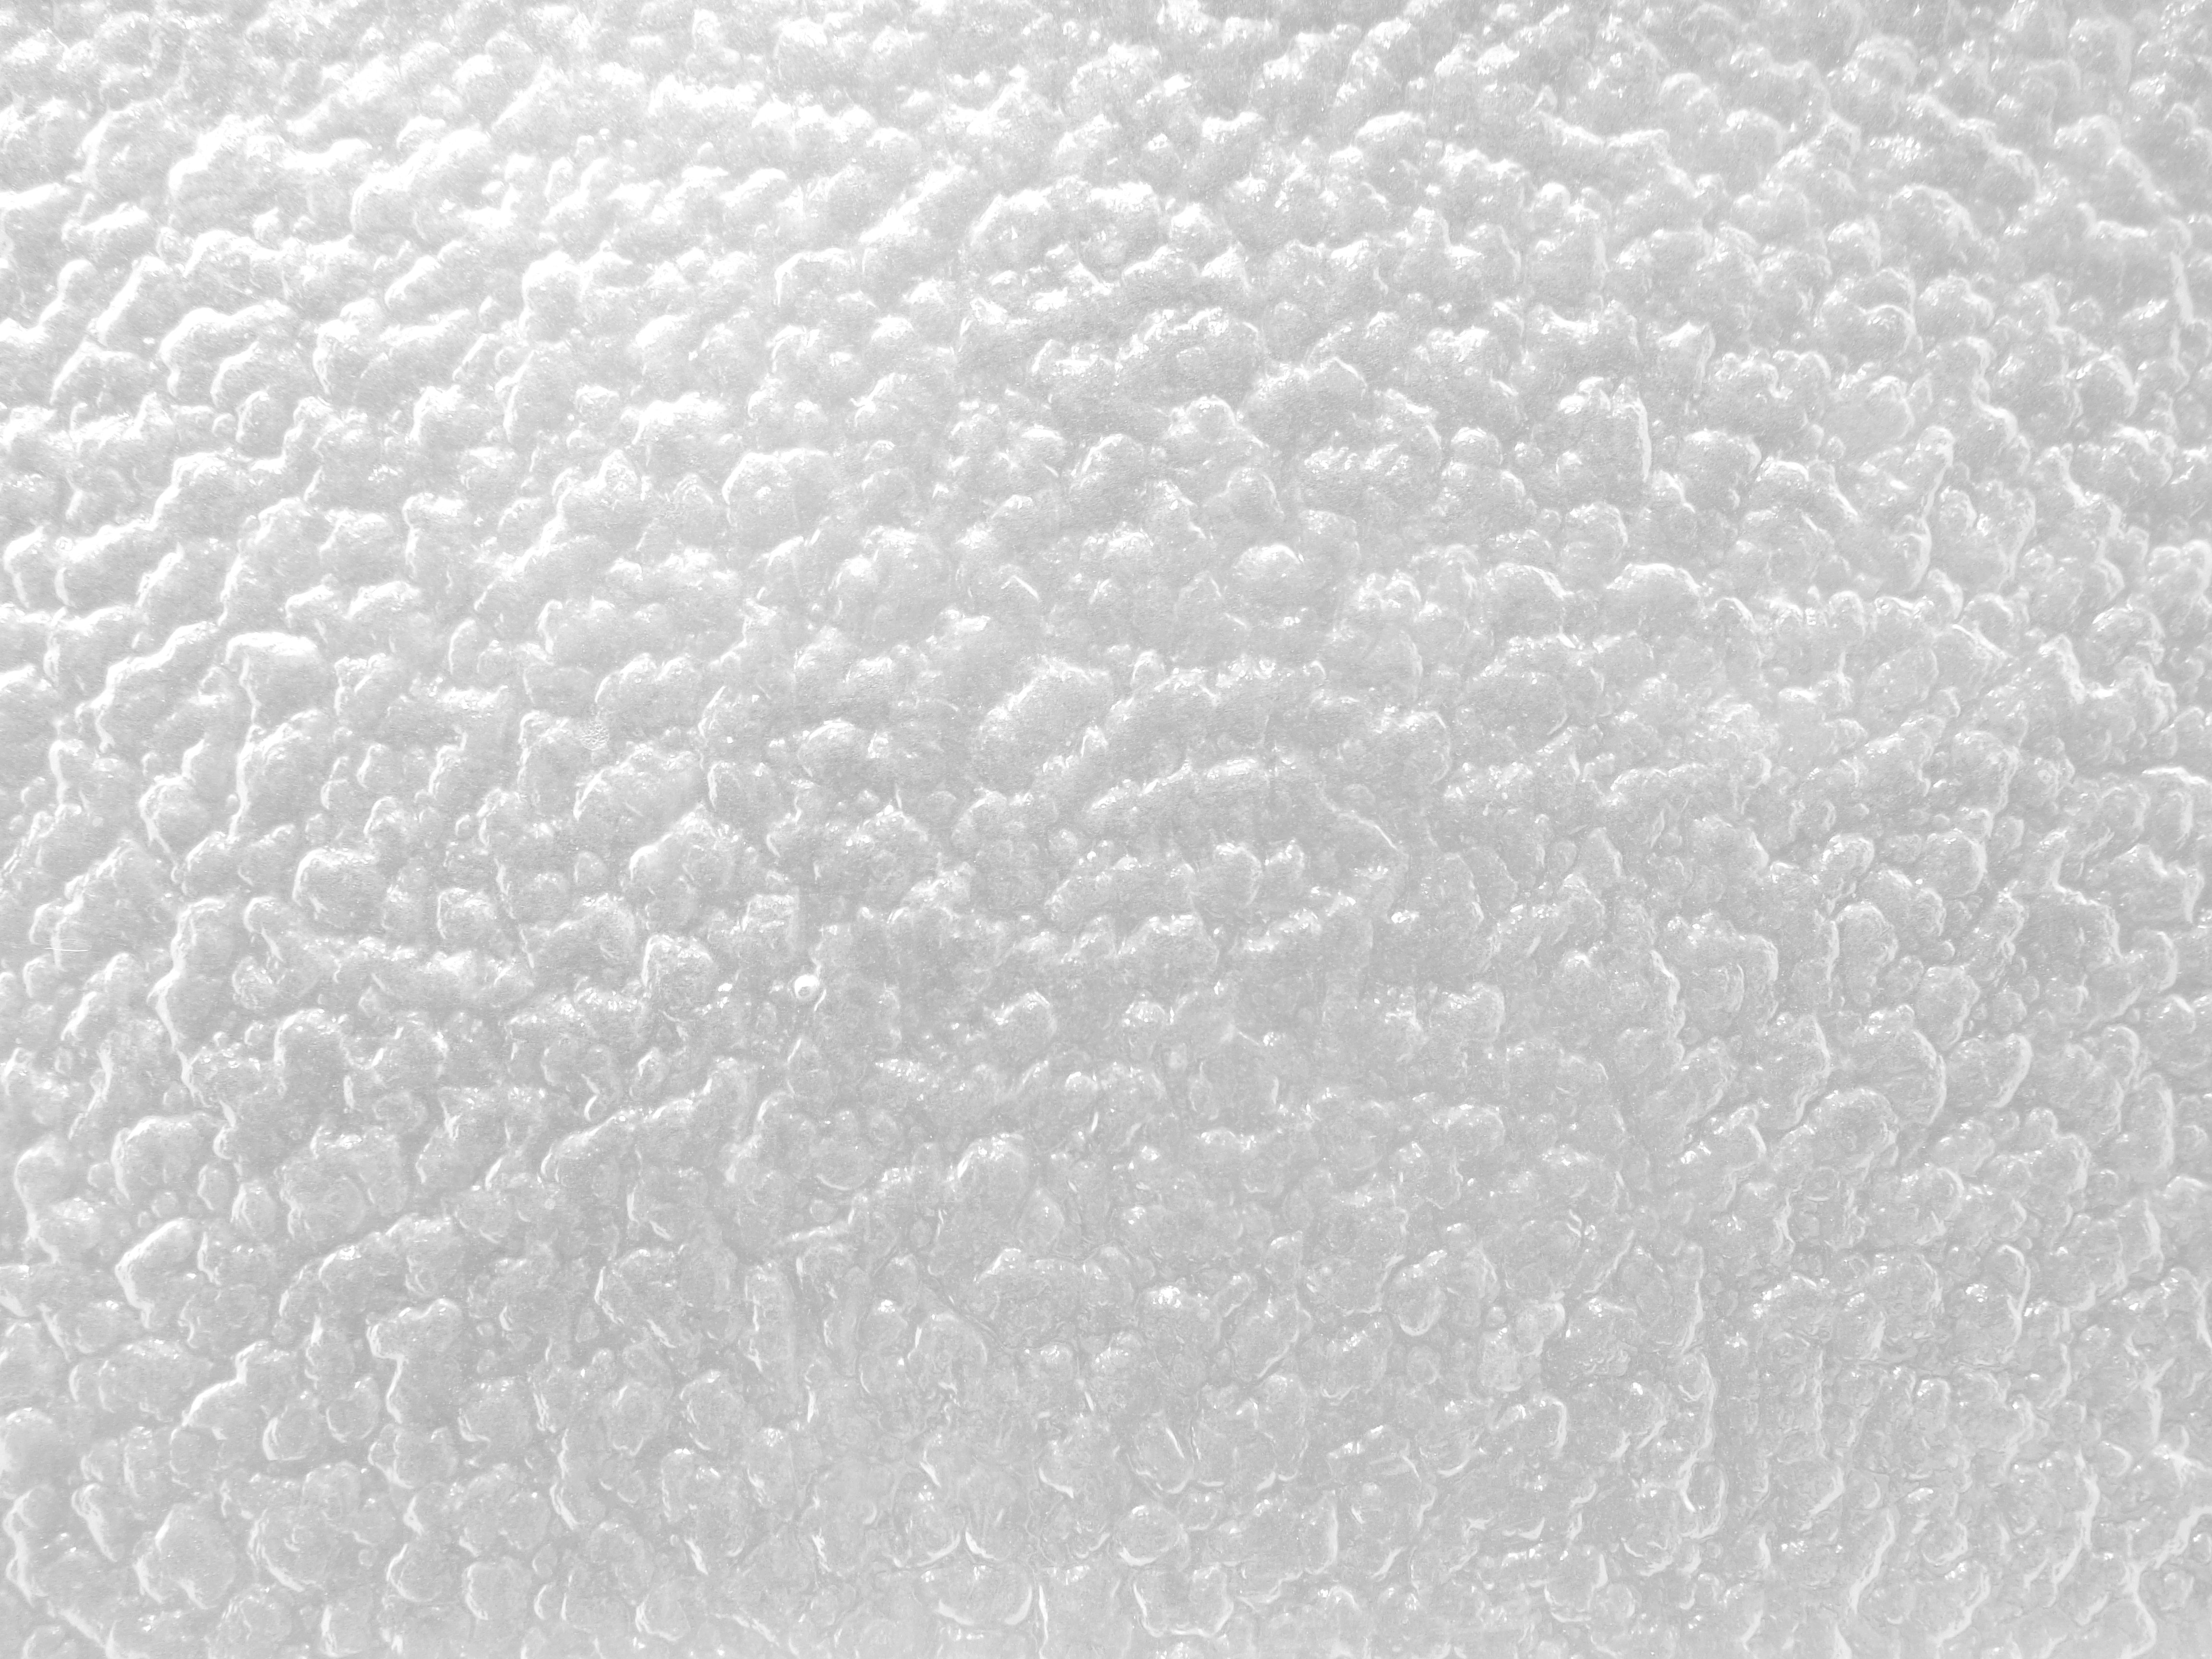 White Textured Glass With Bumpy Surface Free High Resolution Photo Photos Public Domain